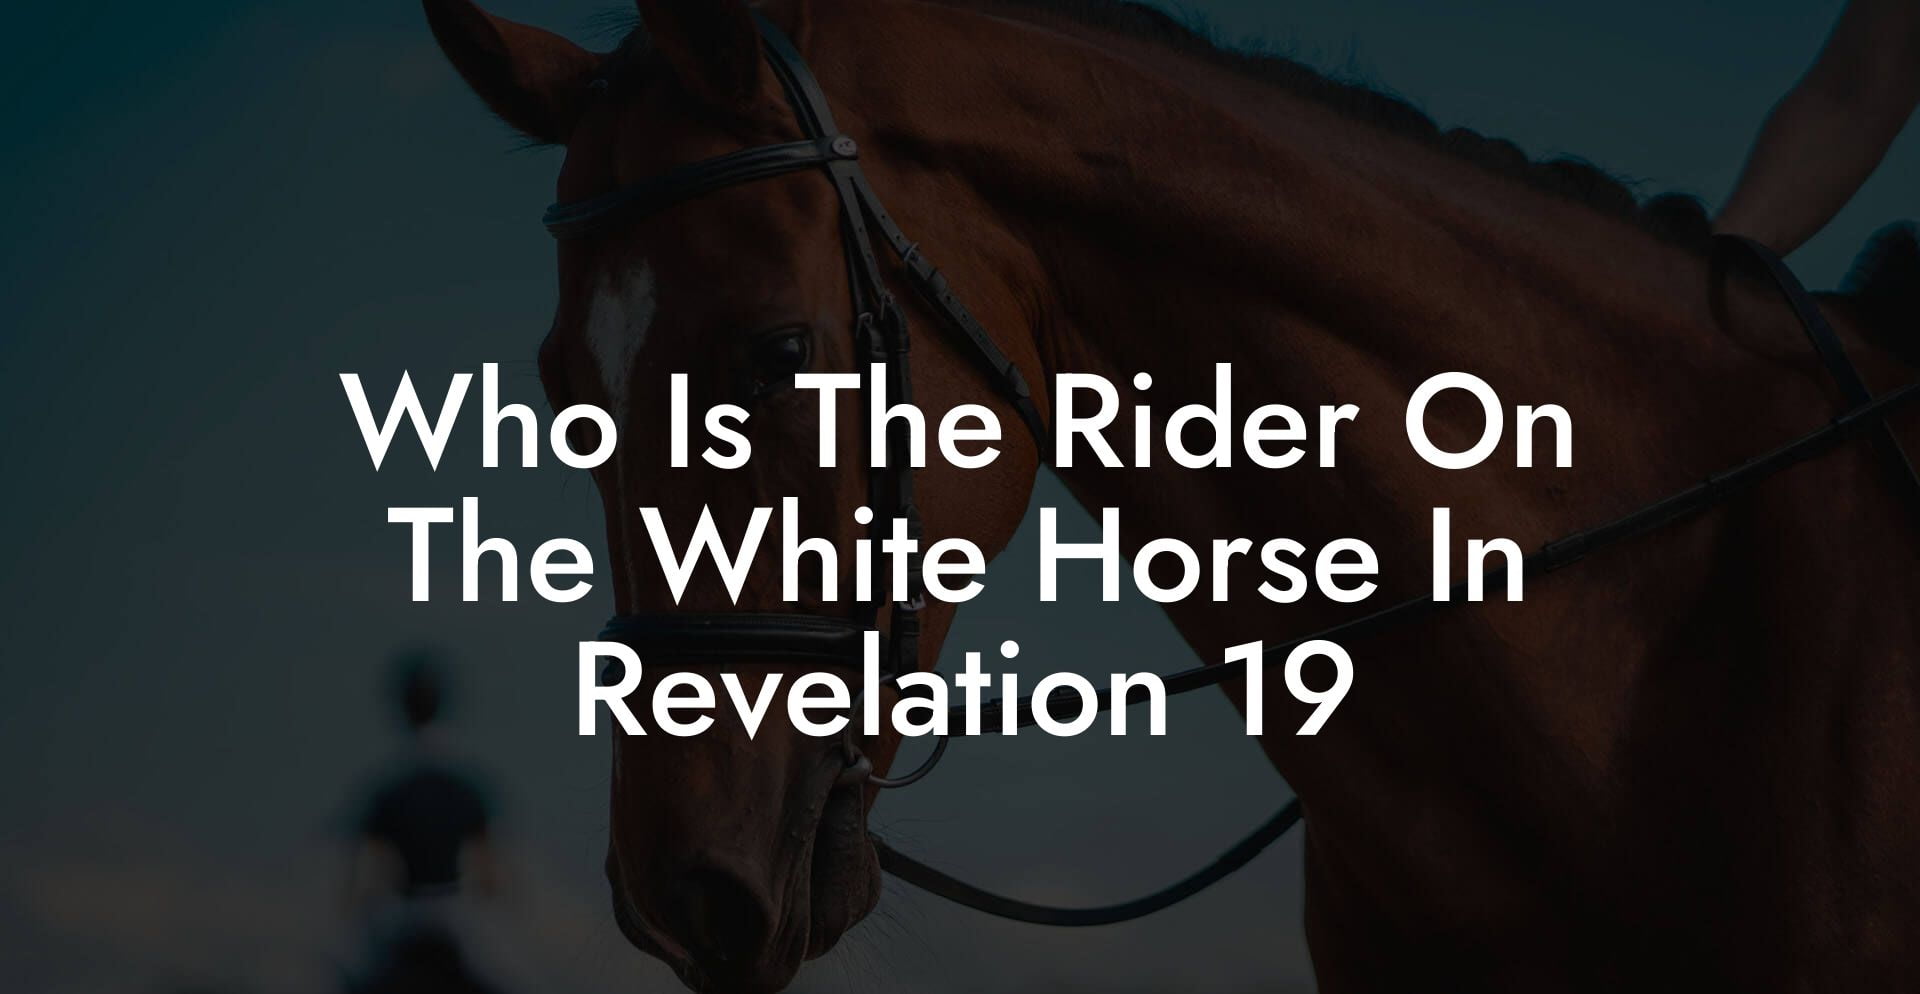 Who Is The Rider On The White Horse In Revelation 19